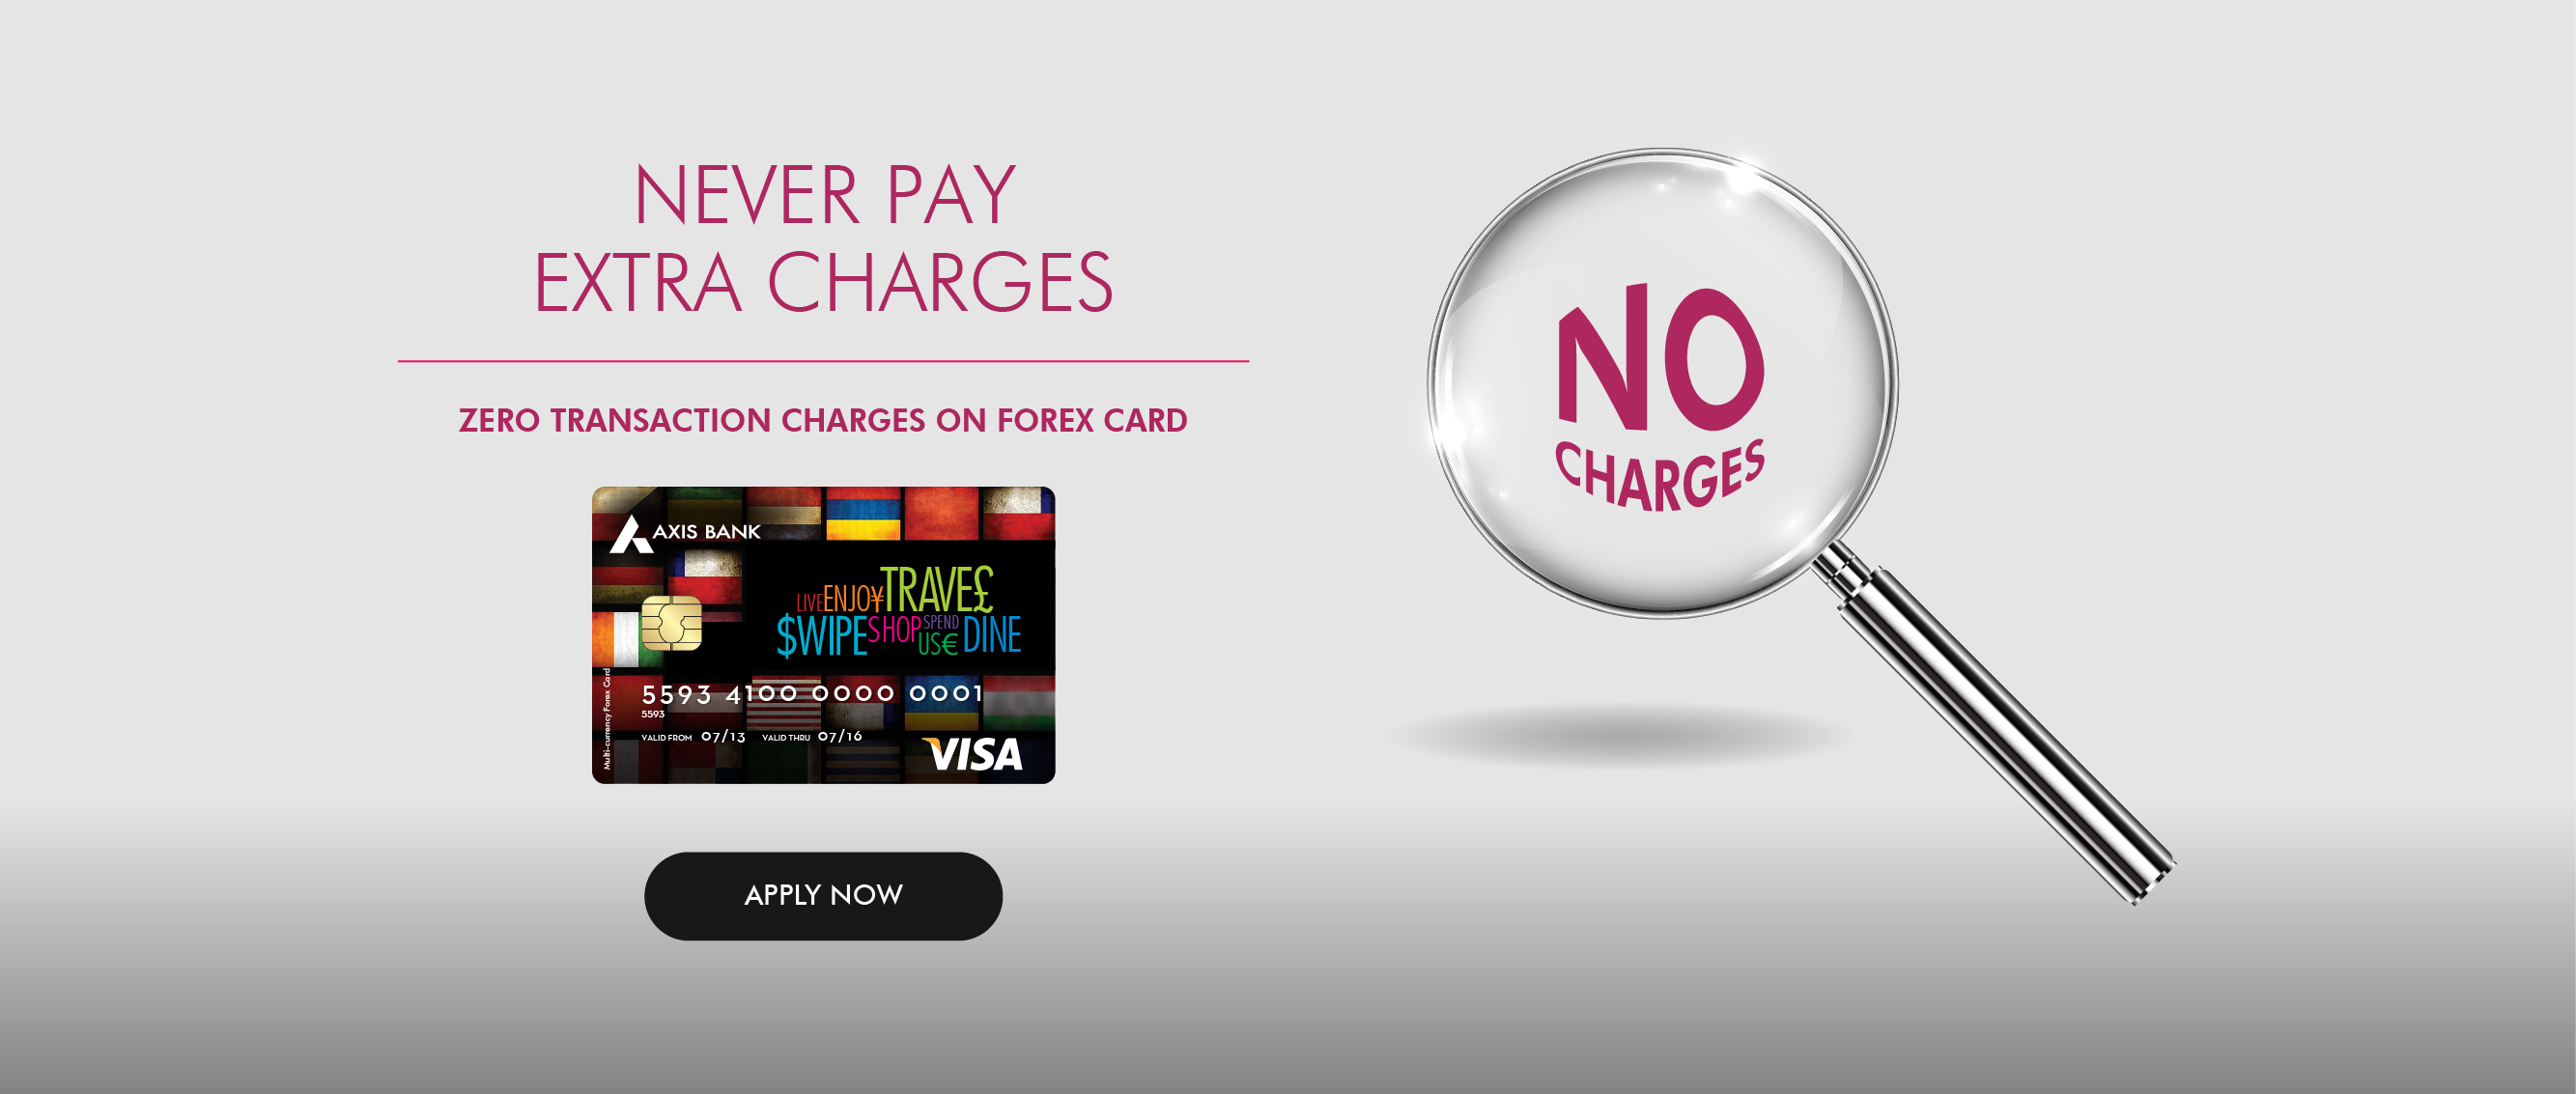 Axis bank forex card charges